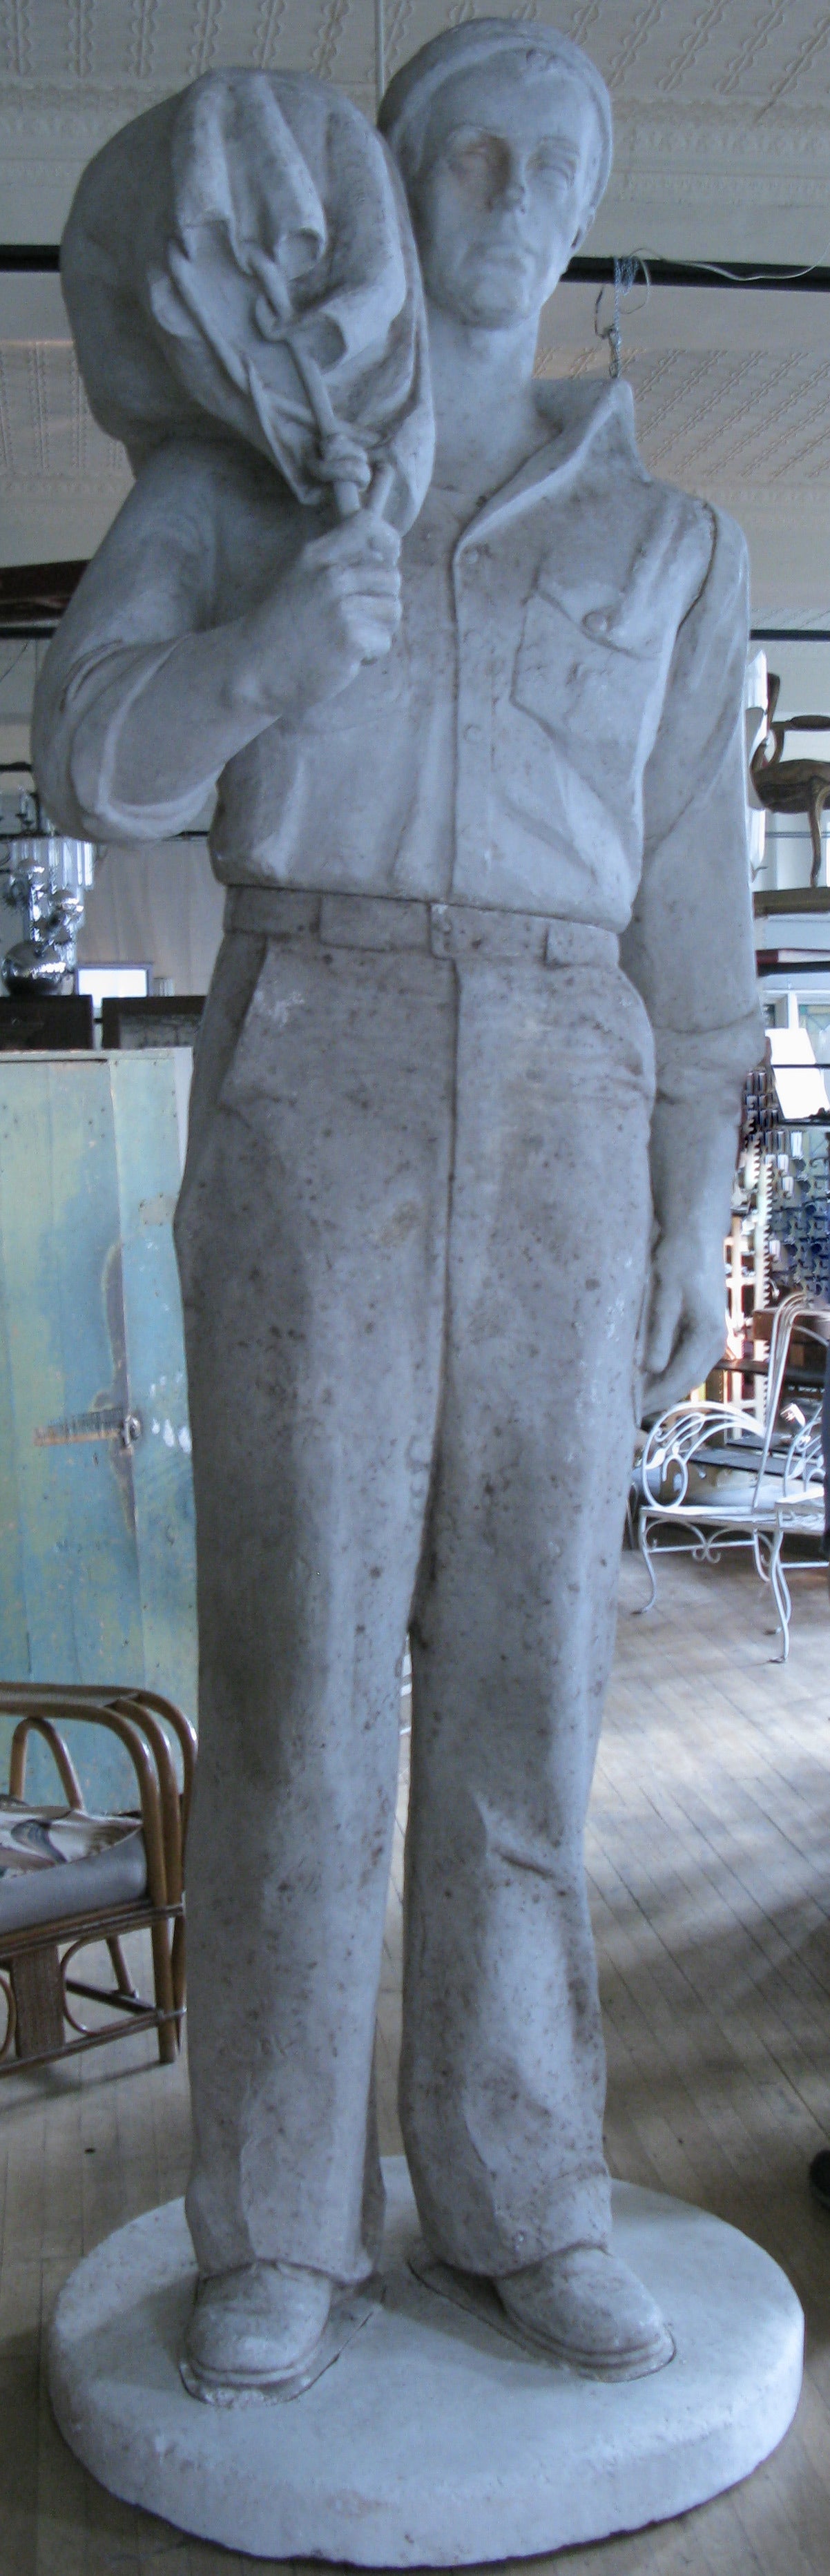 A 9 1/2 foot monumental plaster sculpture of a sailor created by American sculptor Charles Rudy, signed and dated 1949. Charles Rudy taught sculpture for many years at Cooper Union in New York City in the 1920s and 1930s. His sculptures were